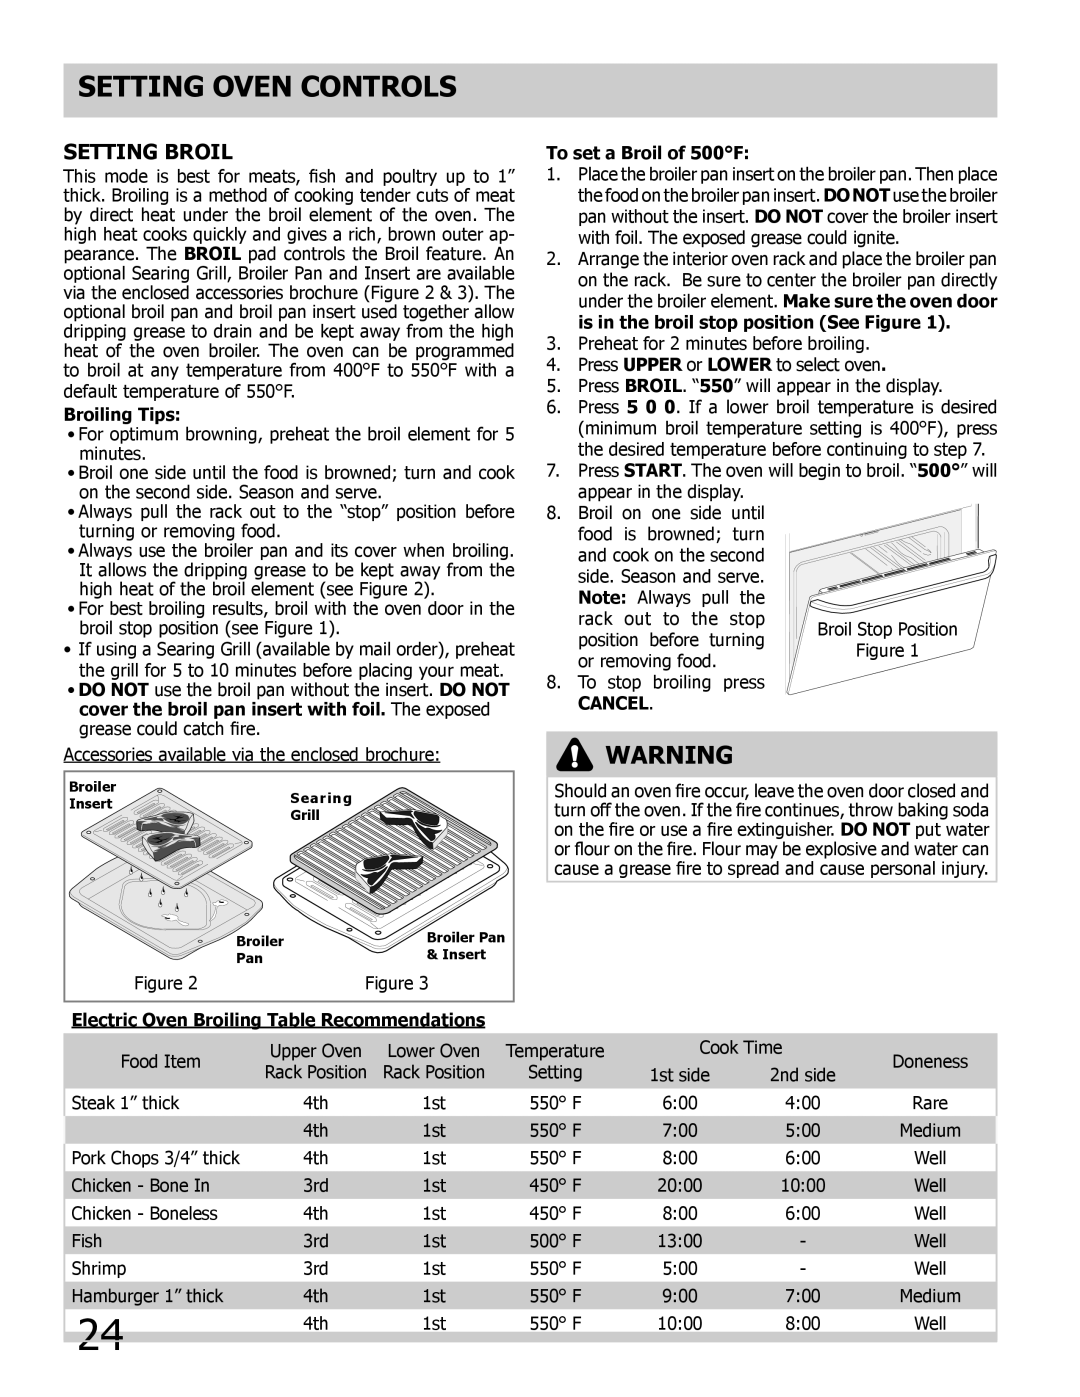 Frigidaire 318205205 manual Setting Broil, Broiling Tips, To set a Broil of 500F, Cancel, Setting Oven Controls 